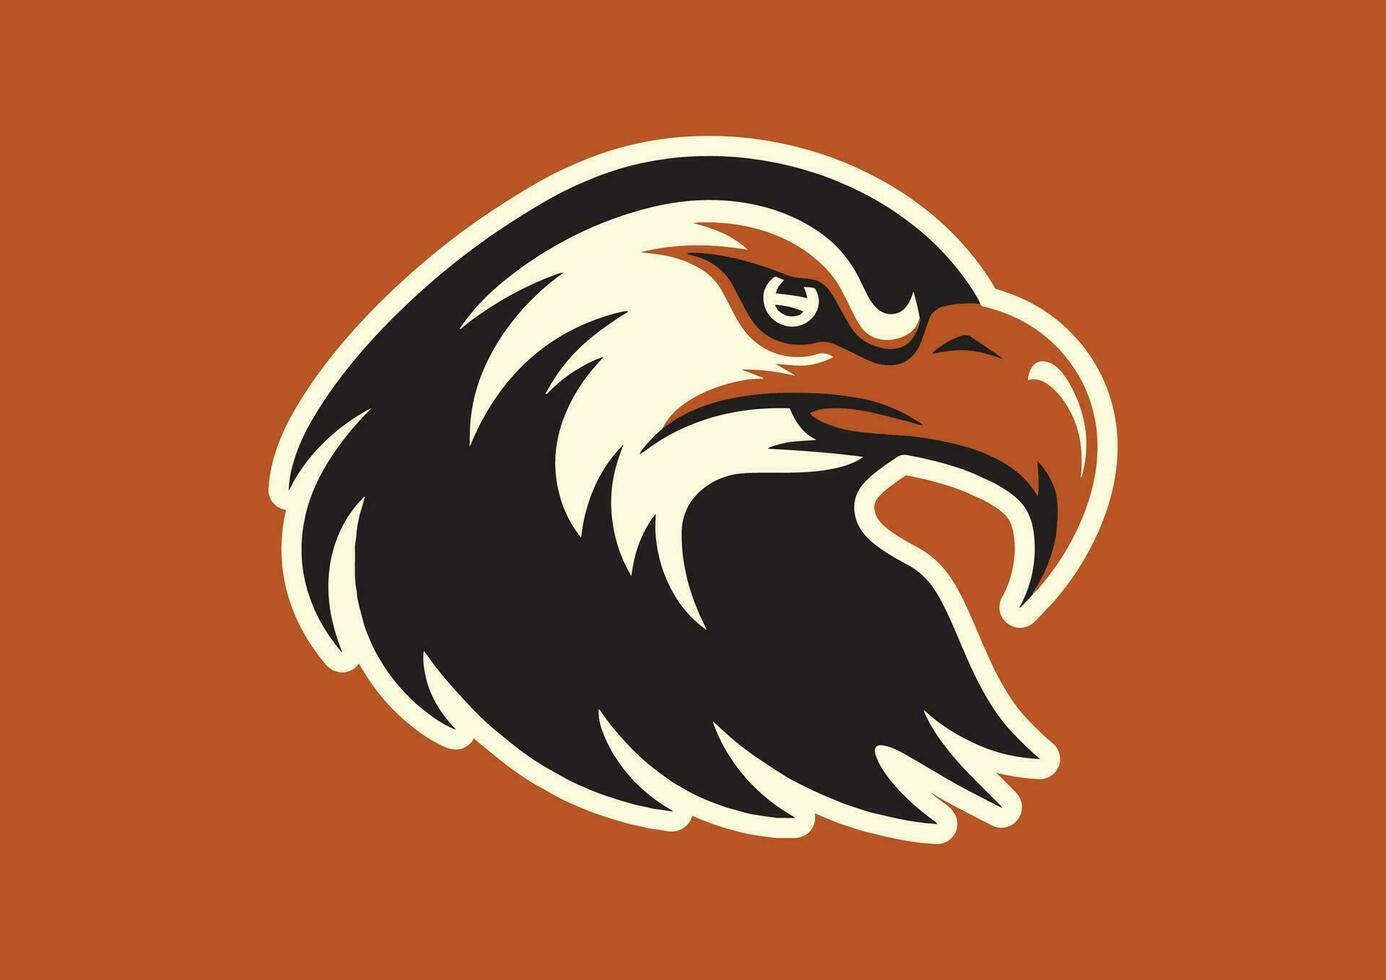 Old School Eagle Mascot Head, Illustrated Classic Eagle Logo as a Vector Graphic and Mascot Illustration for Sport and E-Sport Gaming Teams